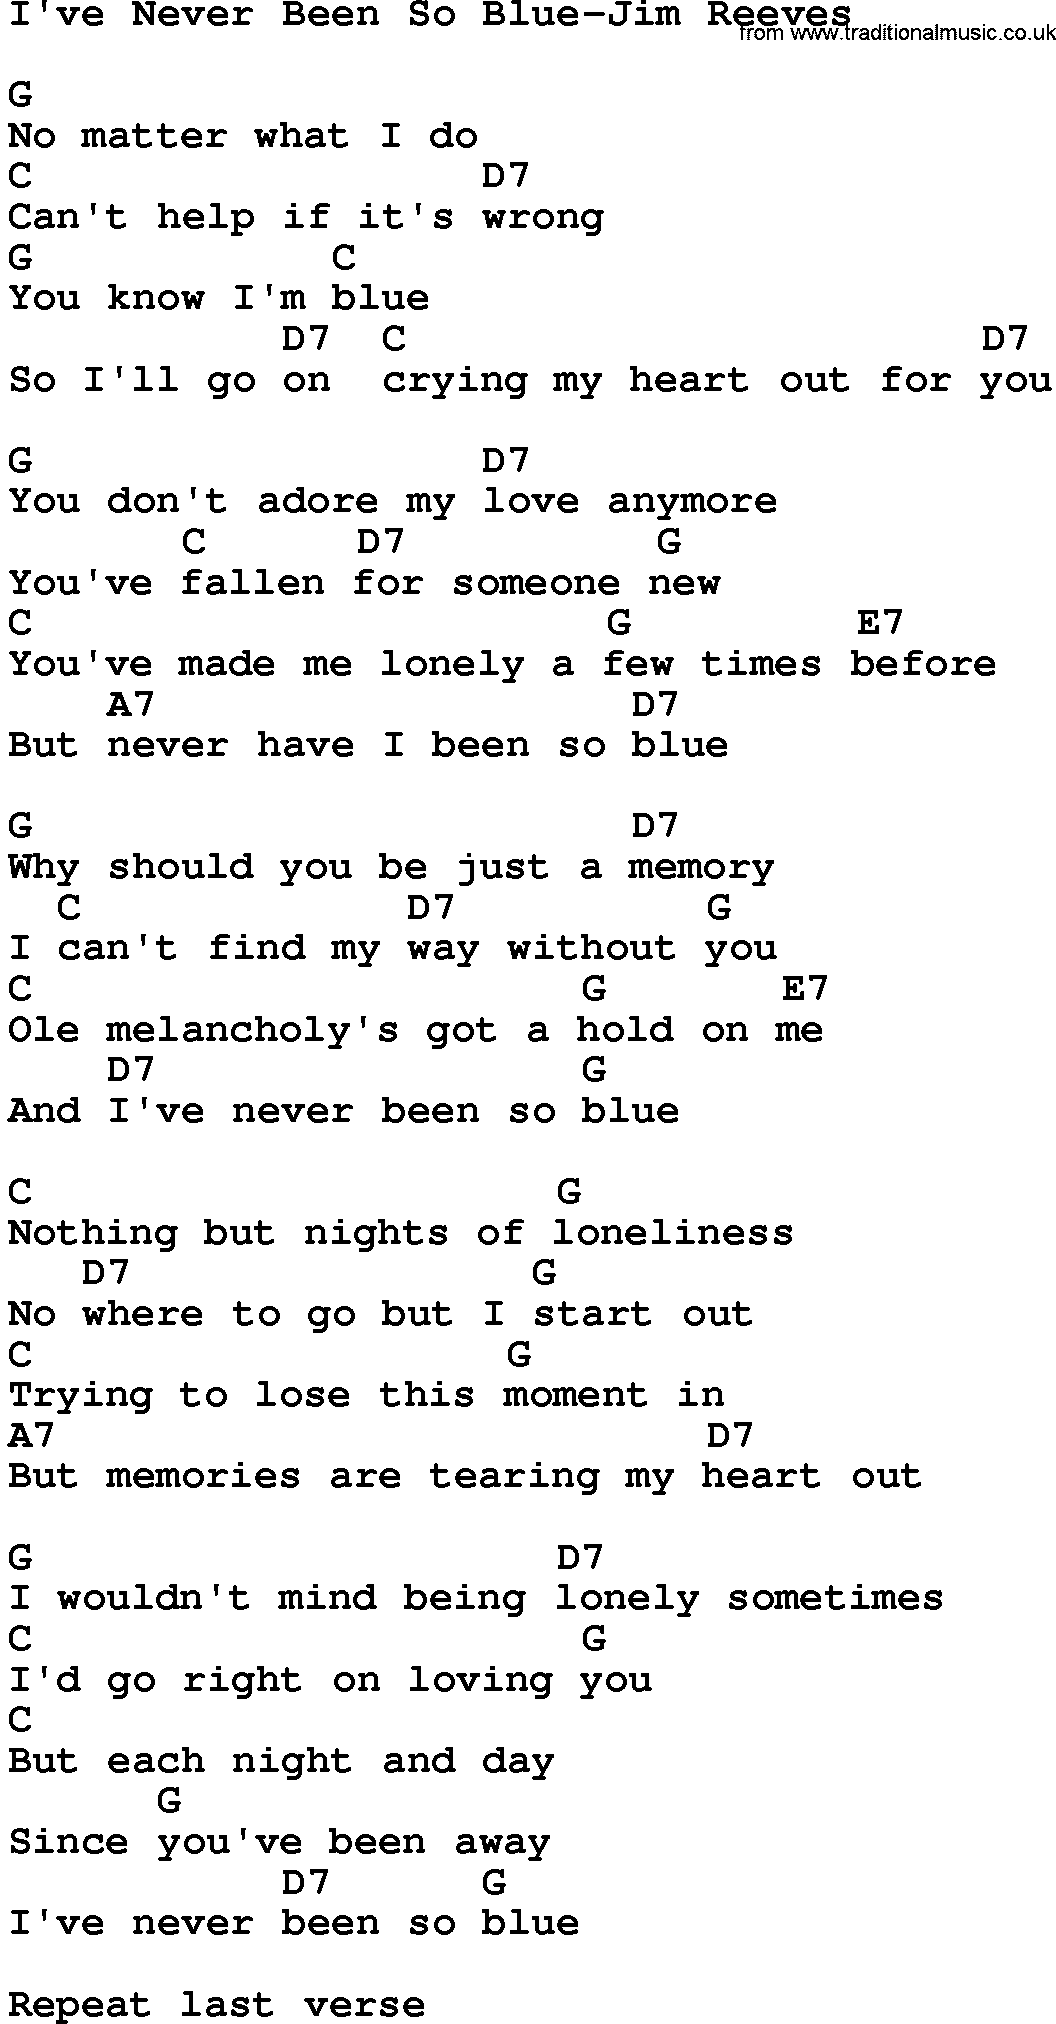 Country music song: I've Never Been So Blue-Jim Reeves lyrics and chords